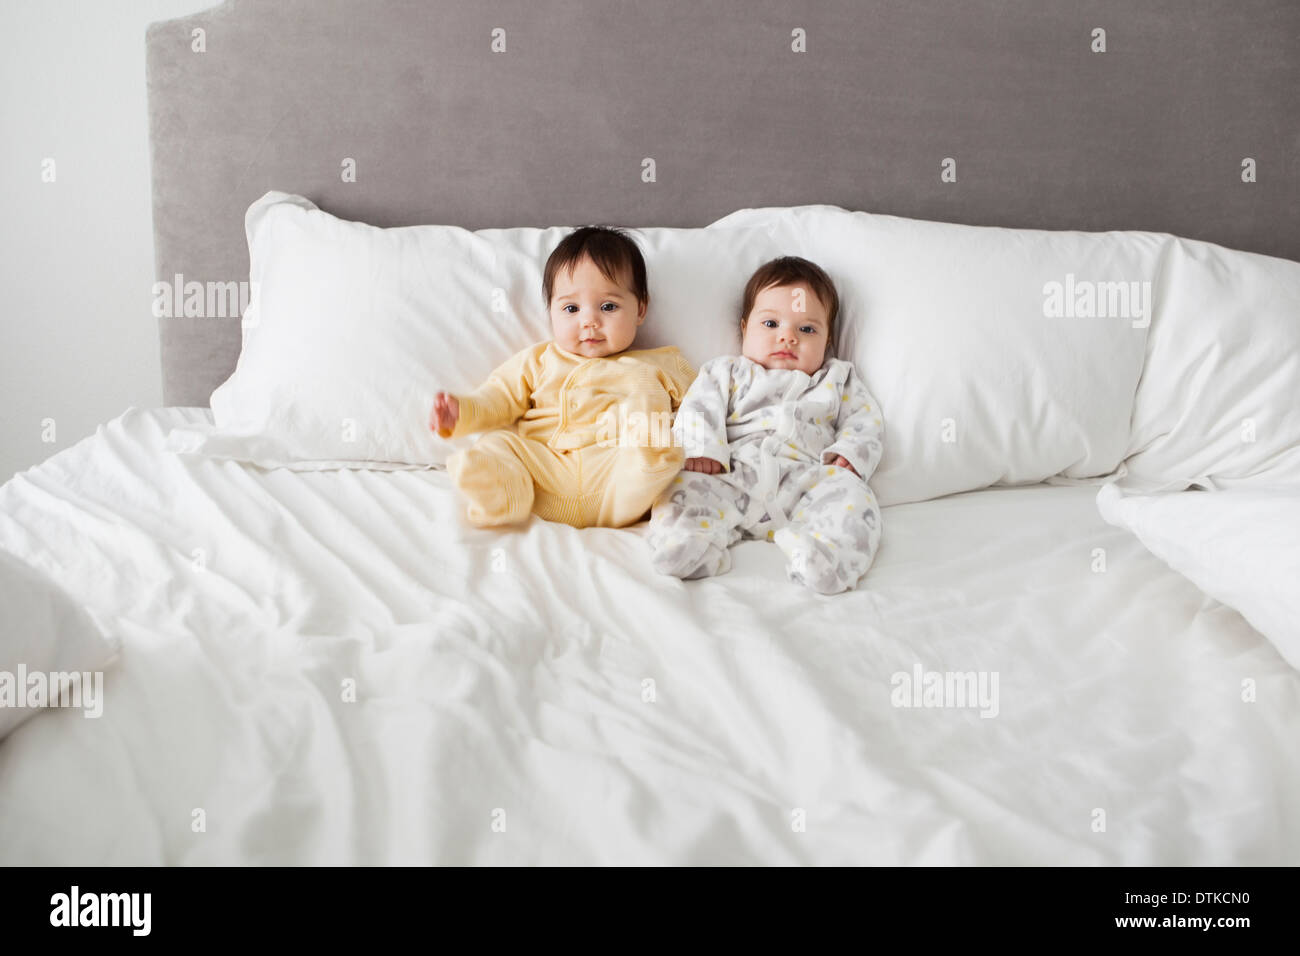 Twin baby girls sitting on bed Stock Photo